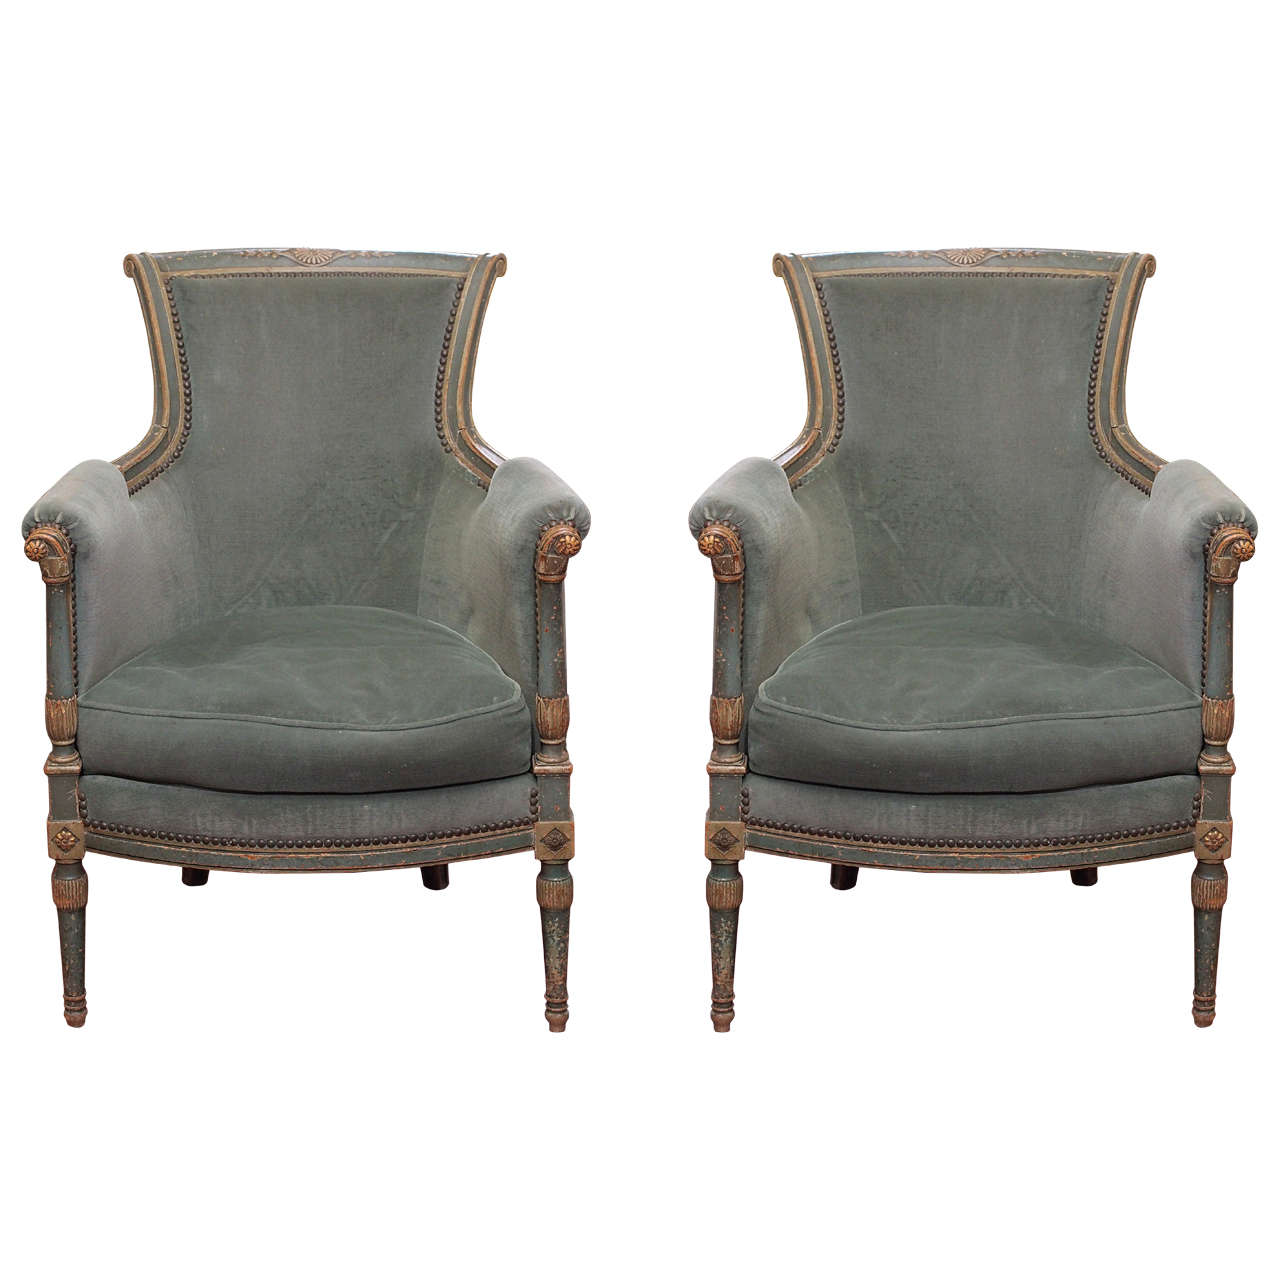 Pair of Directoire style bergeres